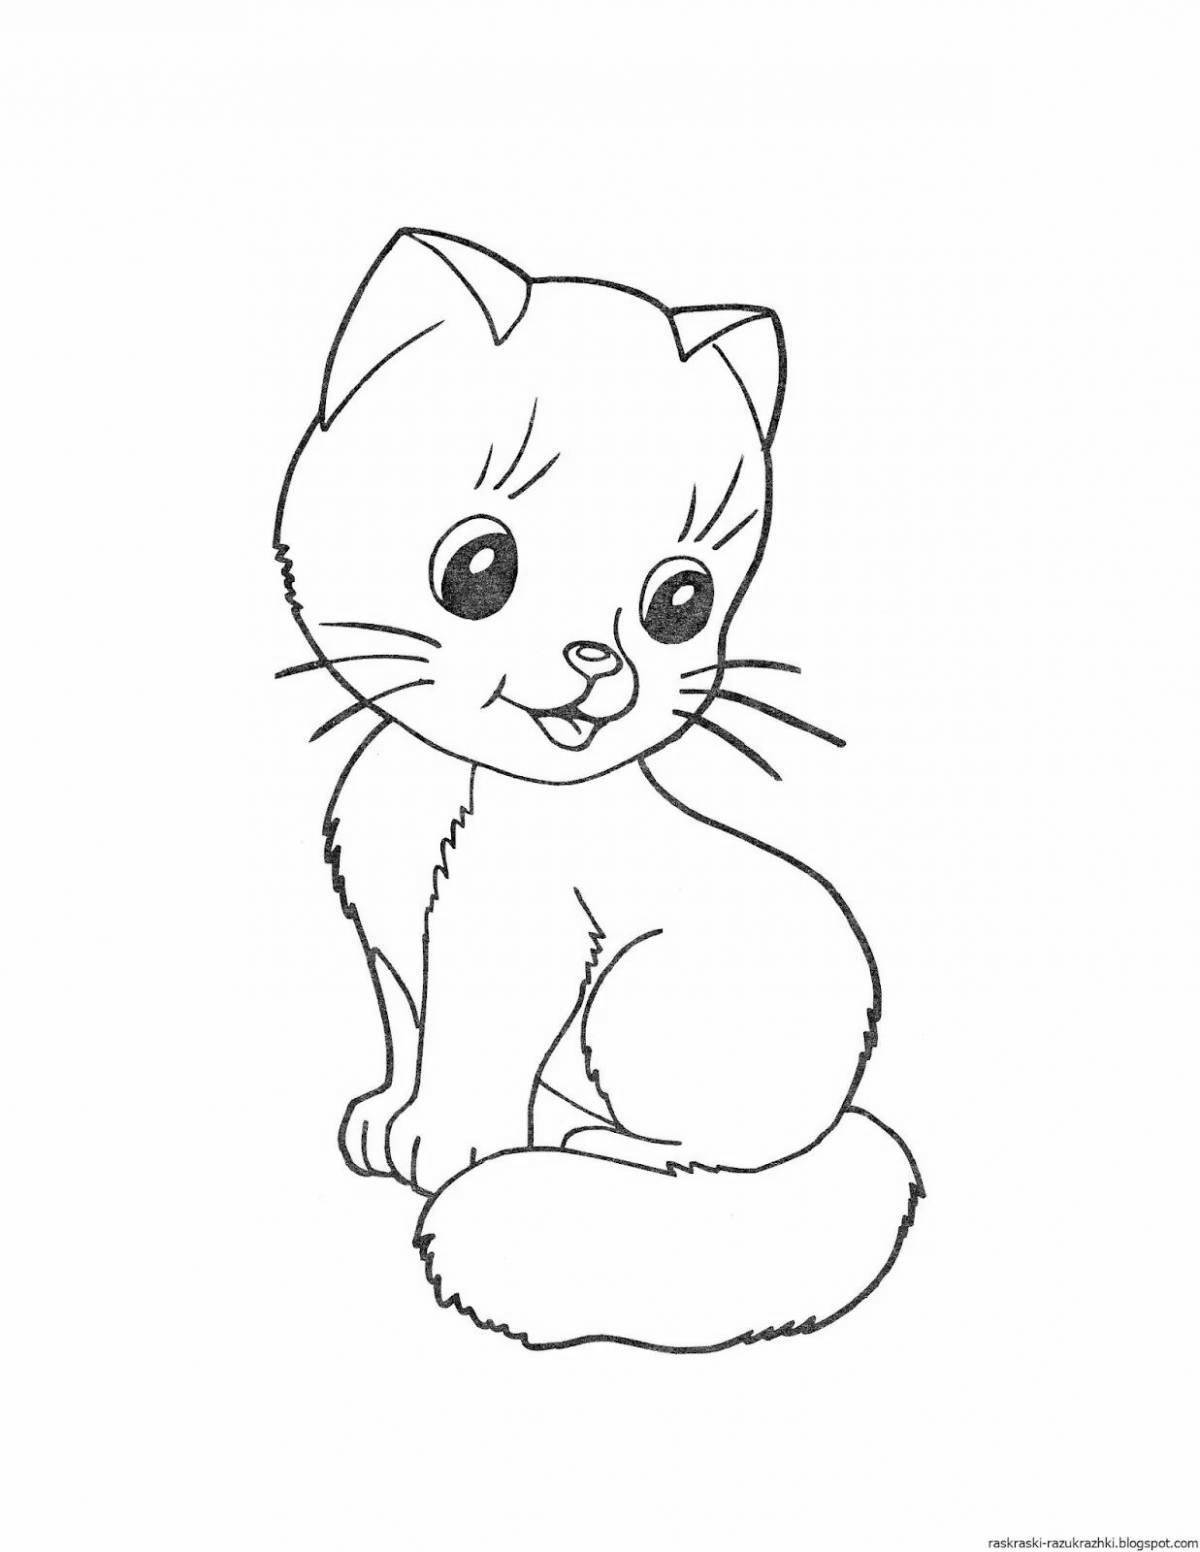 Colourful cat coloring book for children 4-5 years old